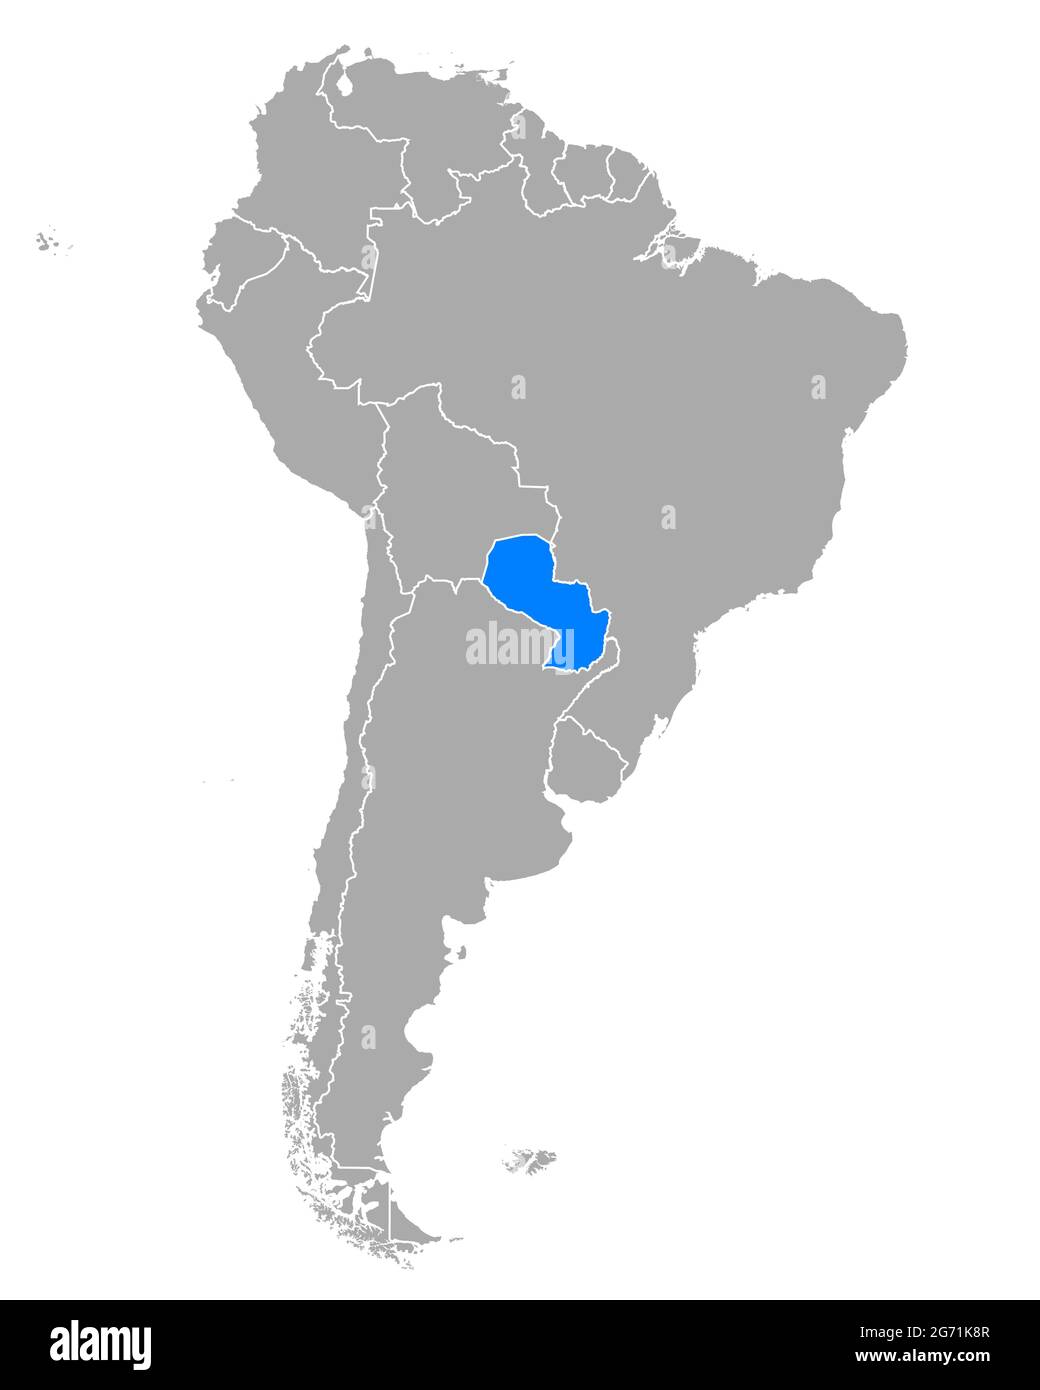 Map Of Paraguay In South America 2G71K8R 